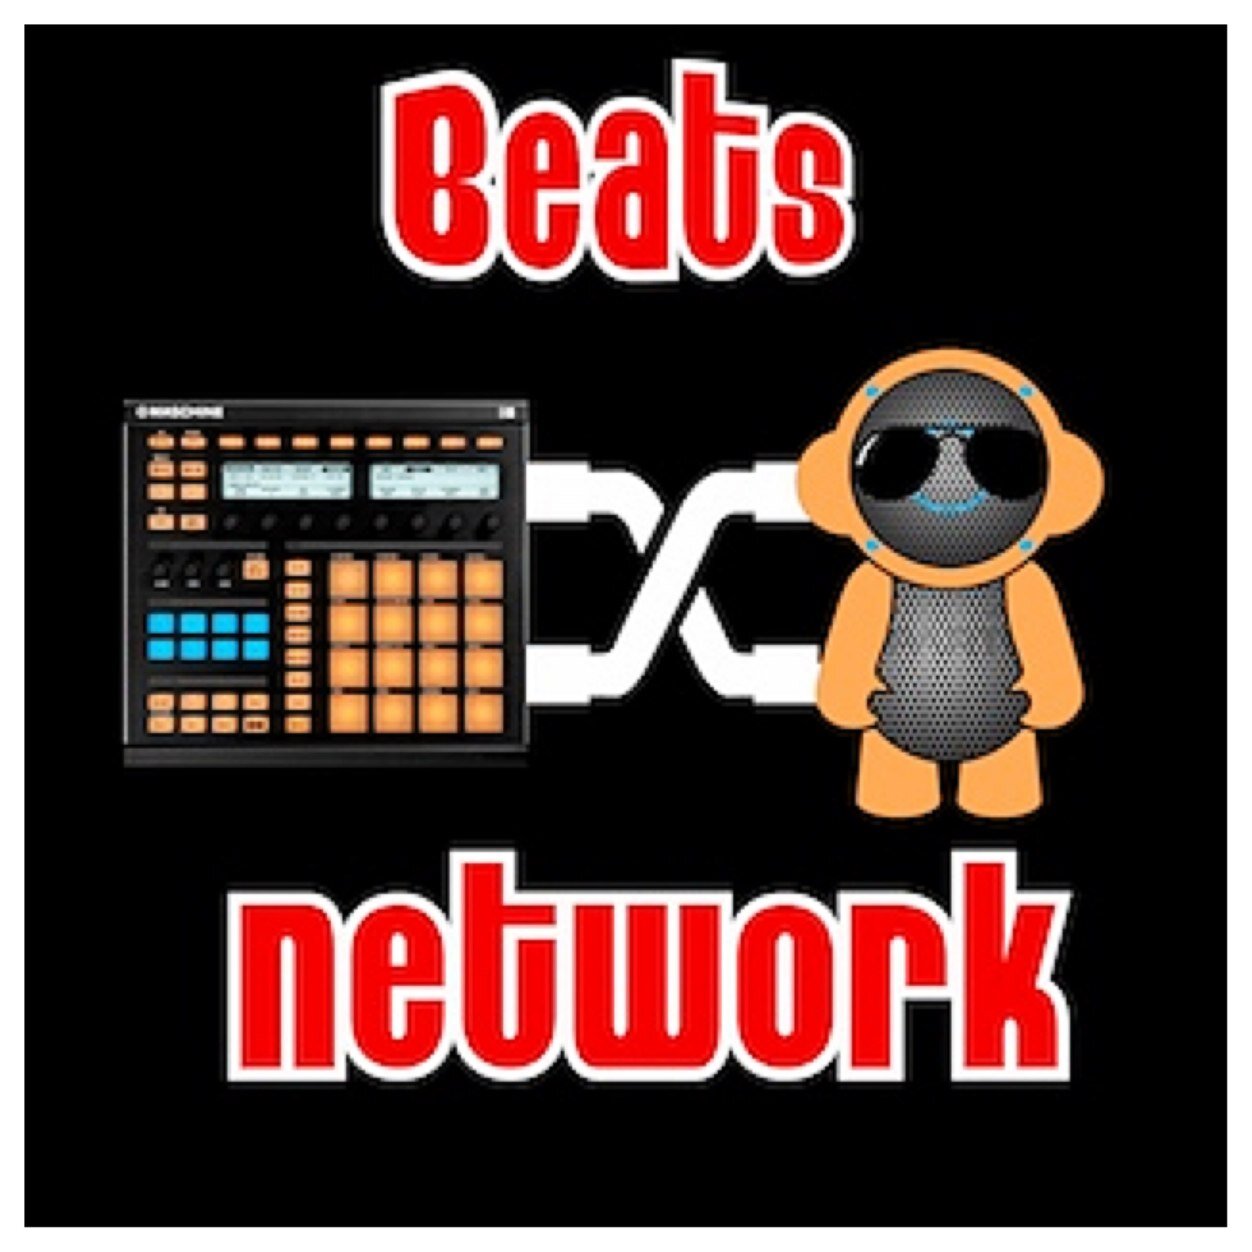 Follow on Instagram @beatsnetwork. Hip Hop,R&B,Pop,Rock,Reggae,&Trap. Lease or Purcha$e.Even with no deal$ we still do this music. Email:bncproducers@gmail.com♫